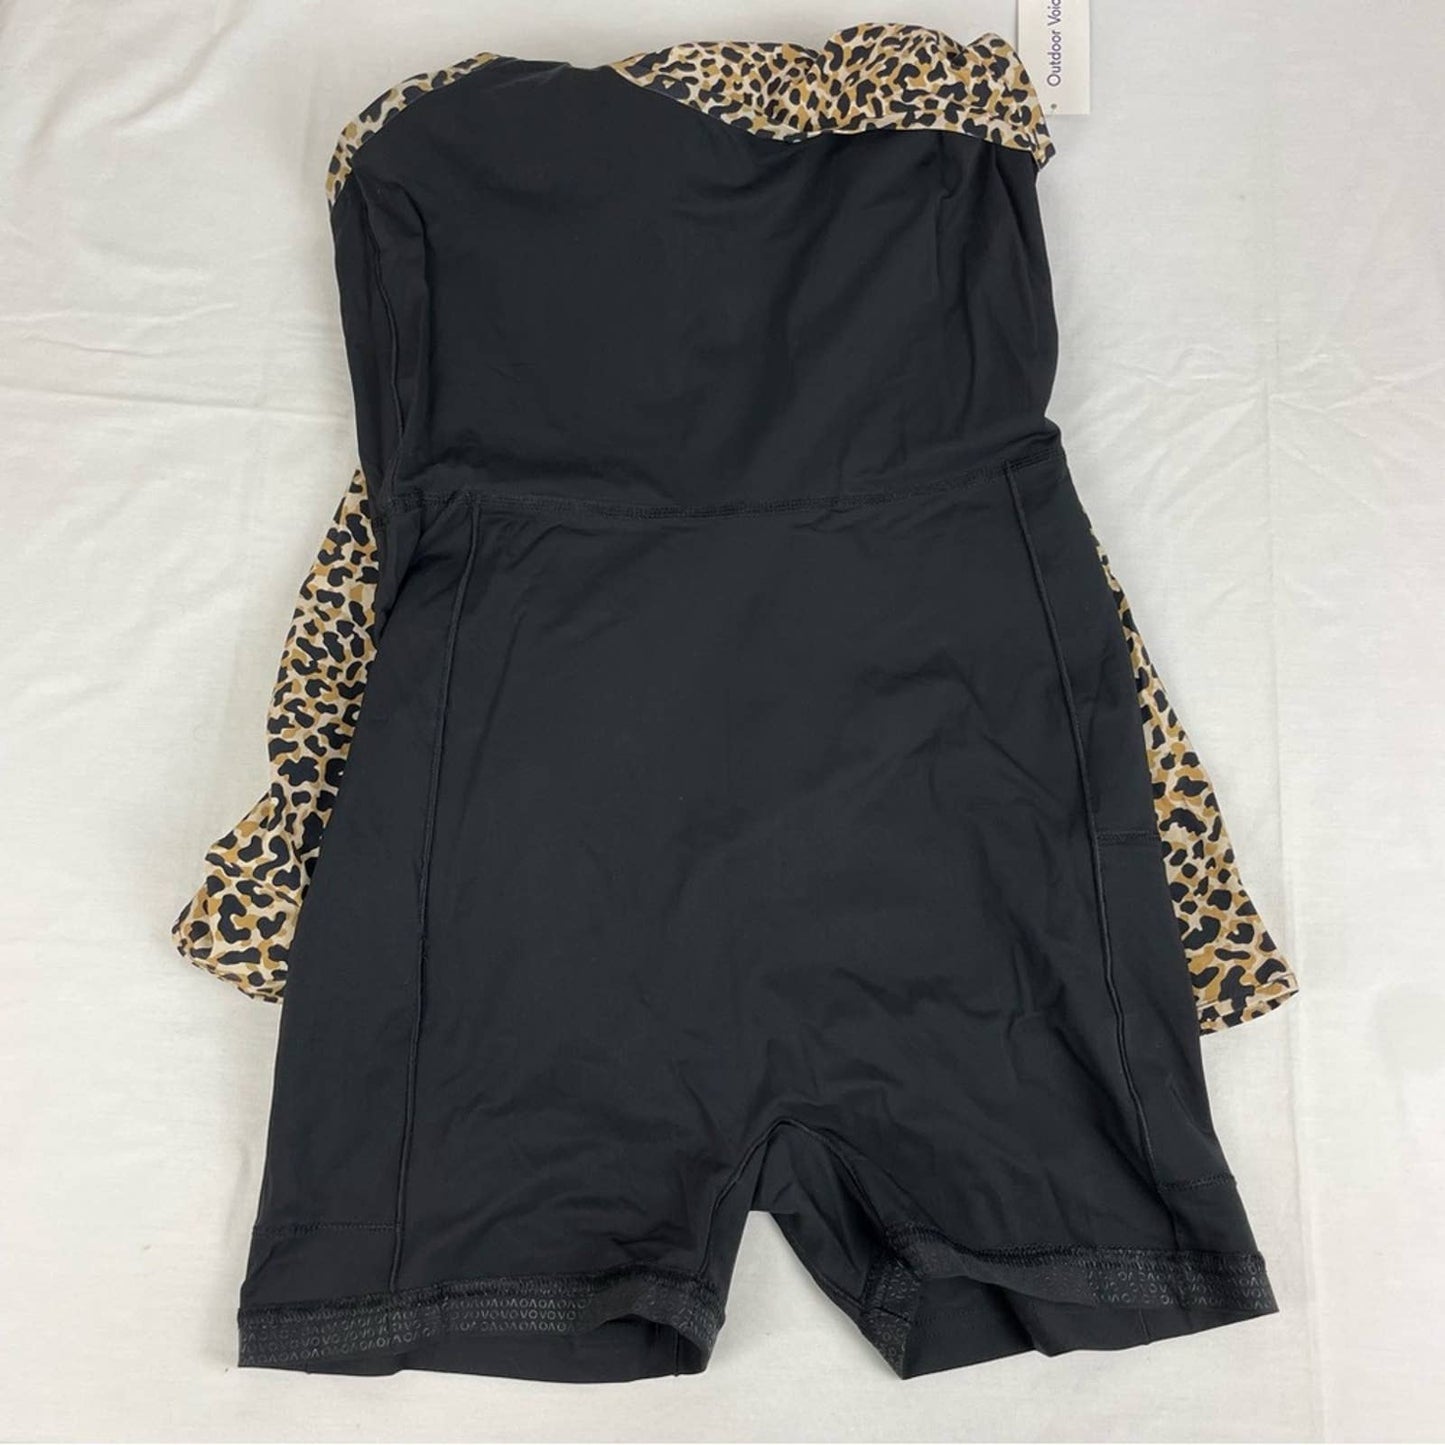 NWT Outdoor Voices The Exercise Dress NEW Version Leopard Print Tennis Running Size M